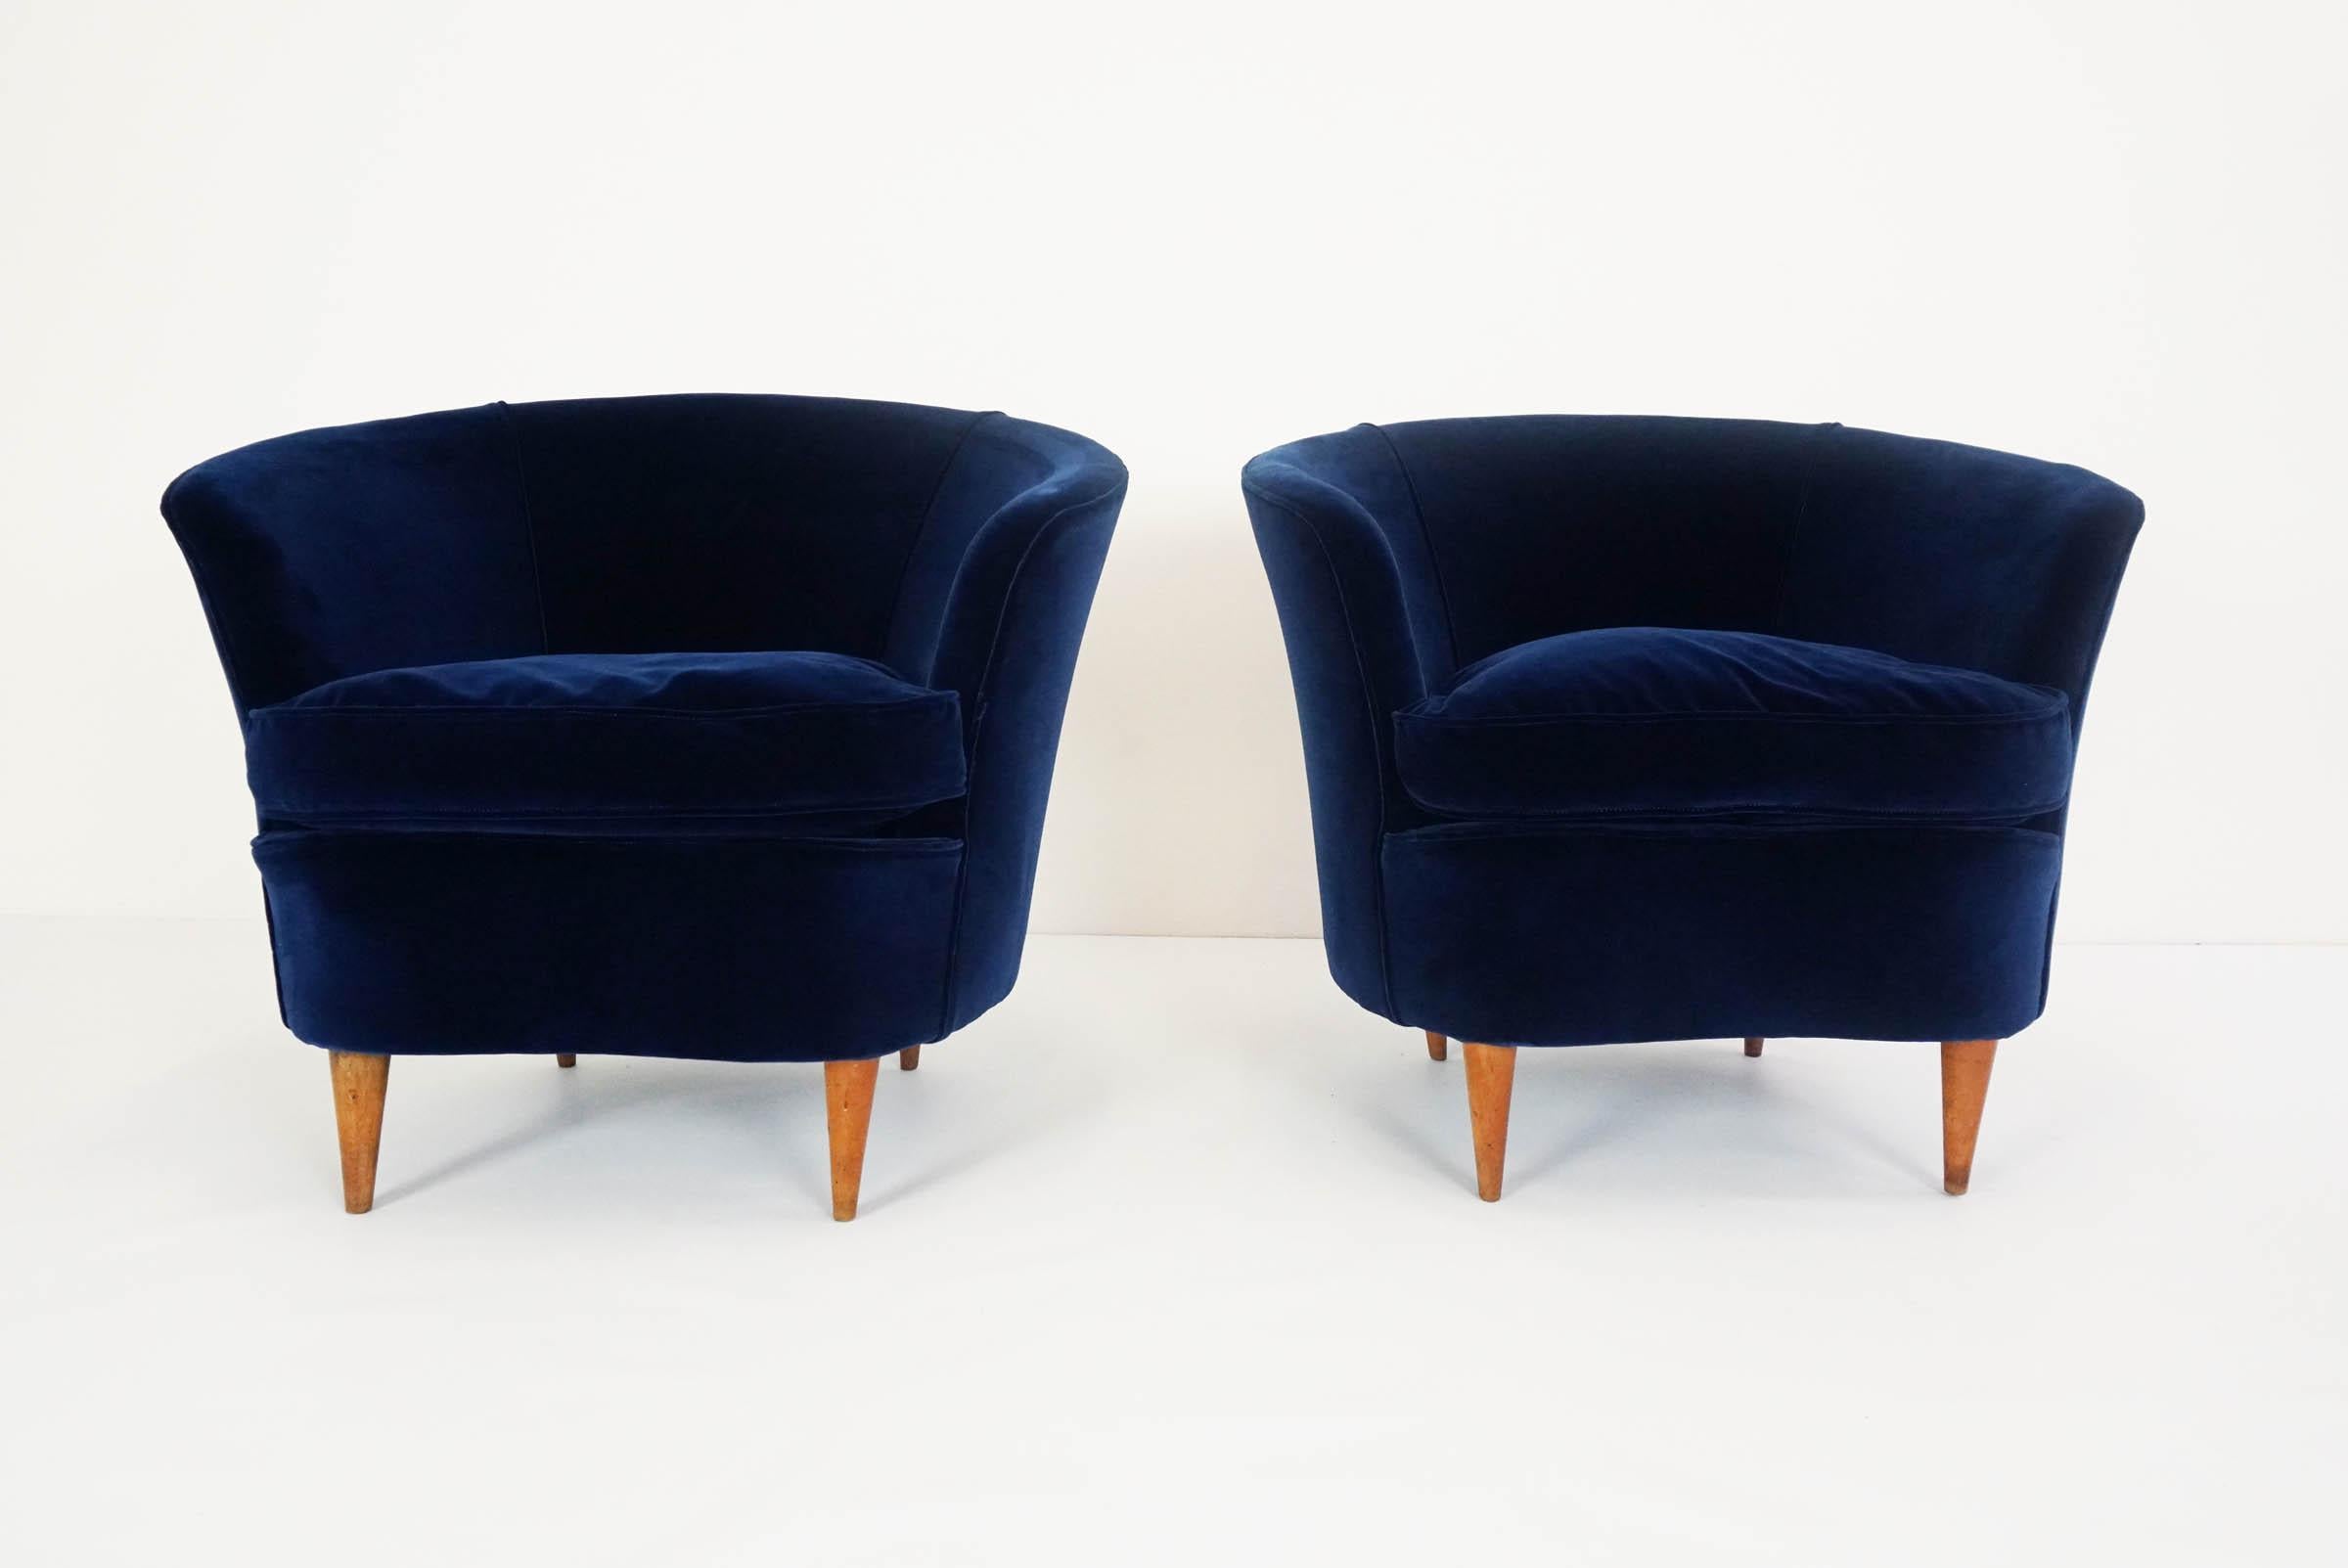 Totally reupholstered in 1st class deep blue velvet
Also available a two-seat sofa

An archived photograph of the present model armchairs and sofa is held in the 